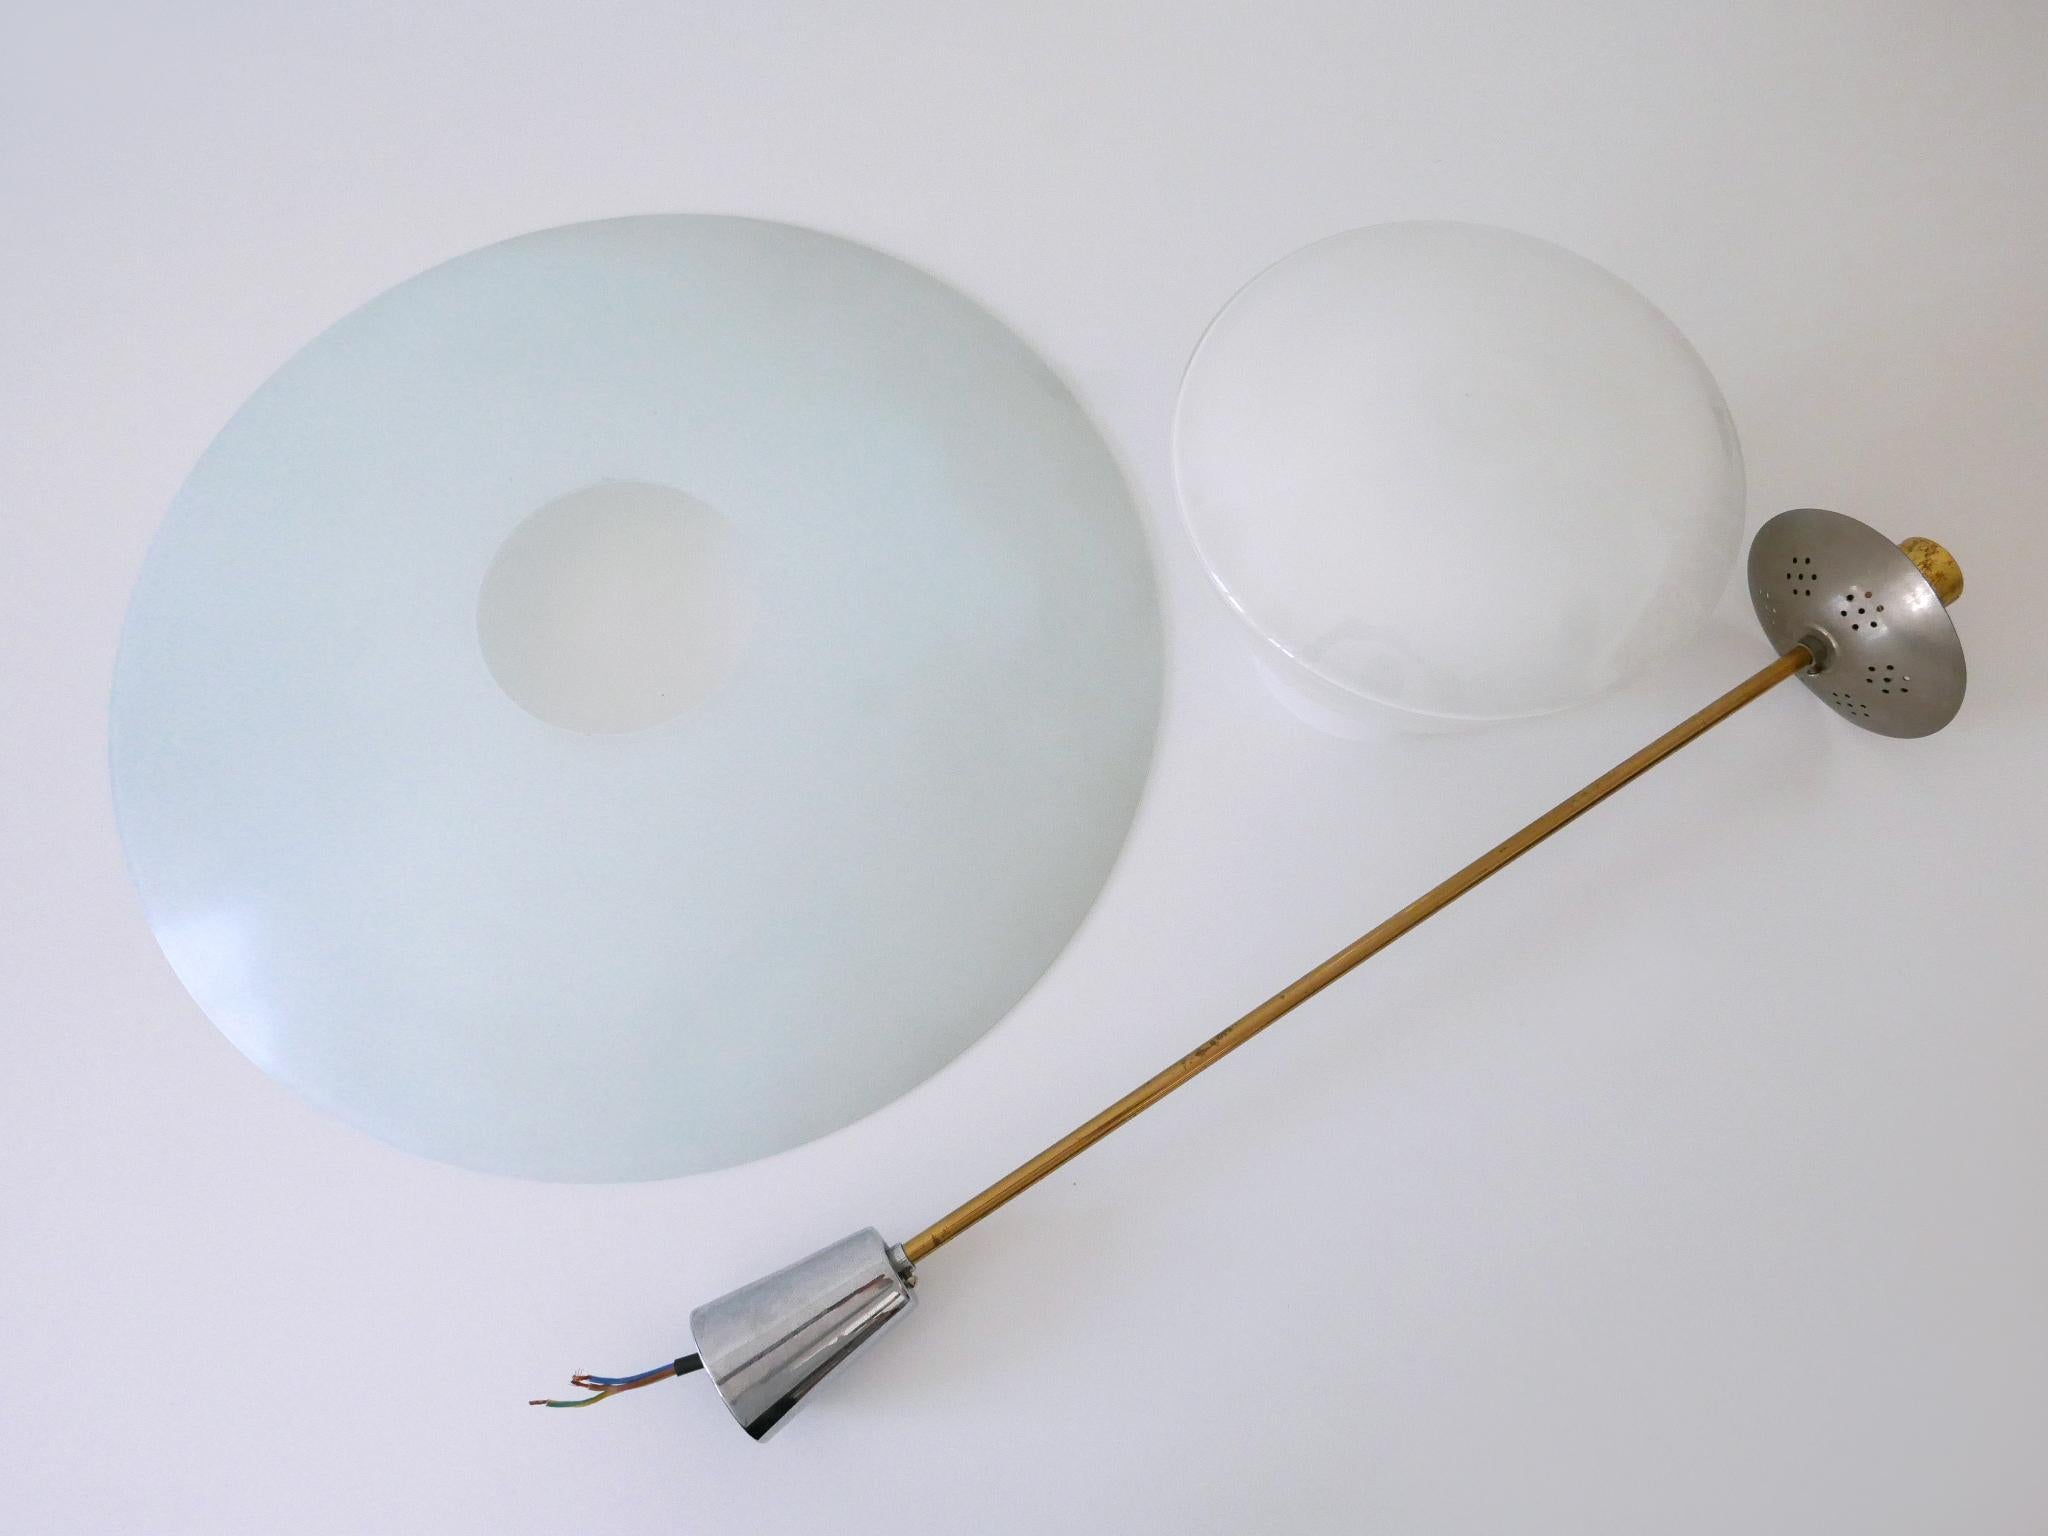 Rare Mid-Century Modern Pendant Lamp by Wolfgang Tümpel for Doria Germany 1950s For Sale 14